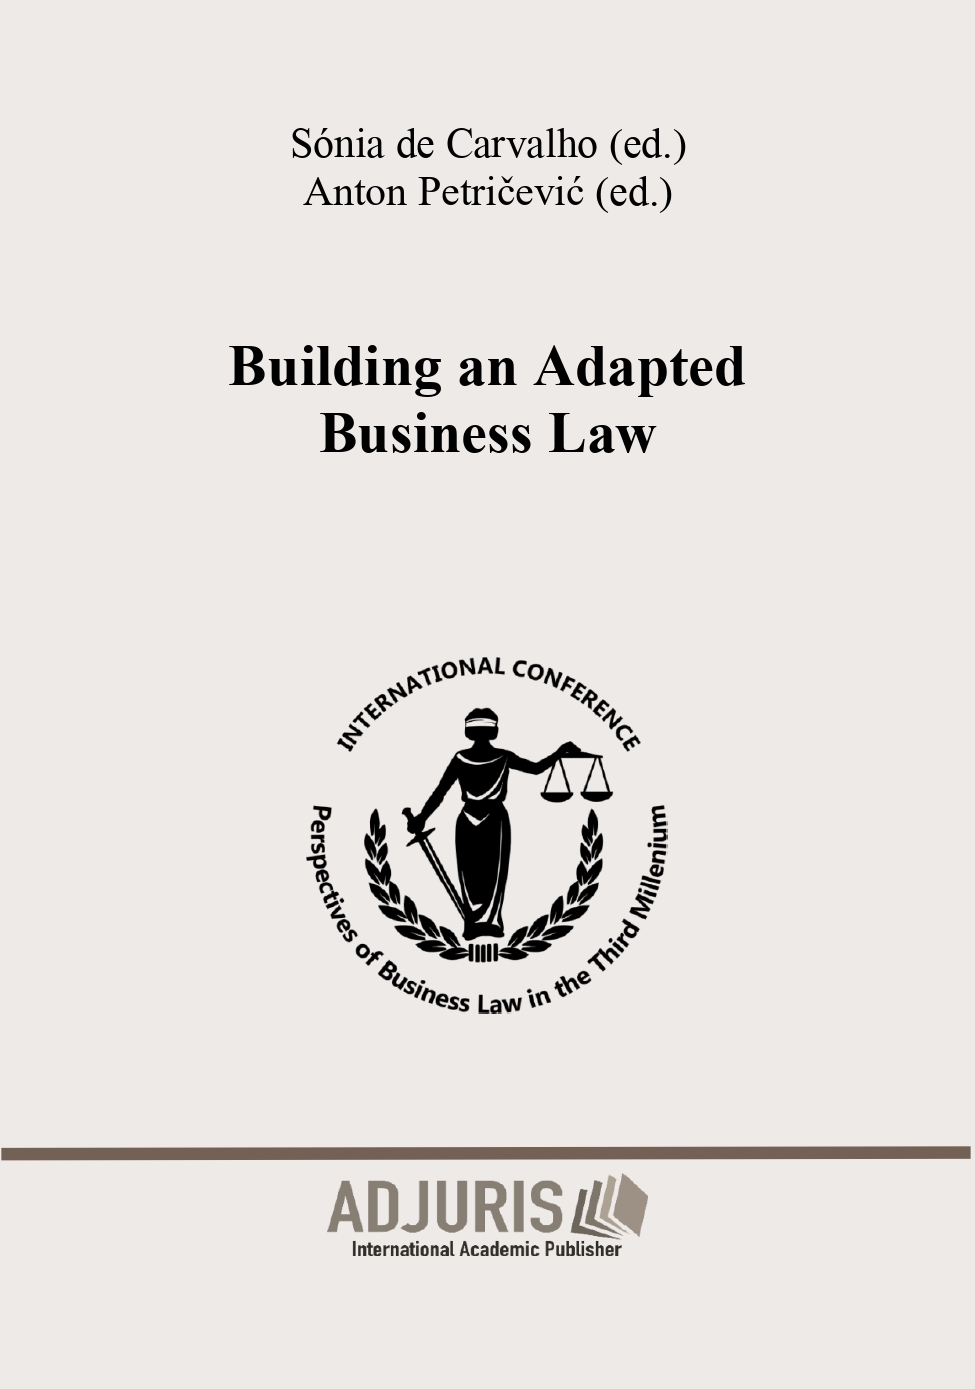 Building an Adapted Business Law